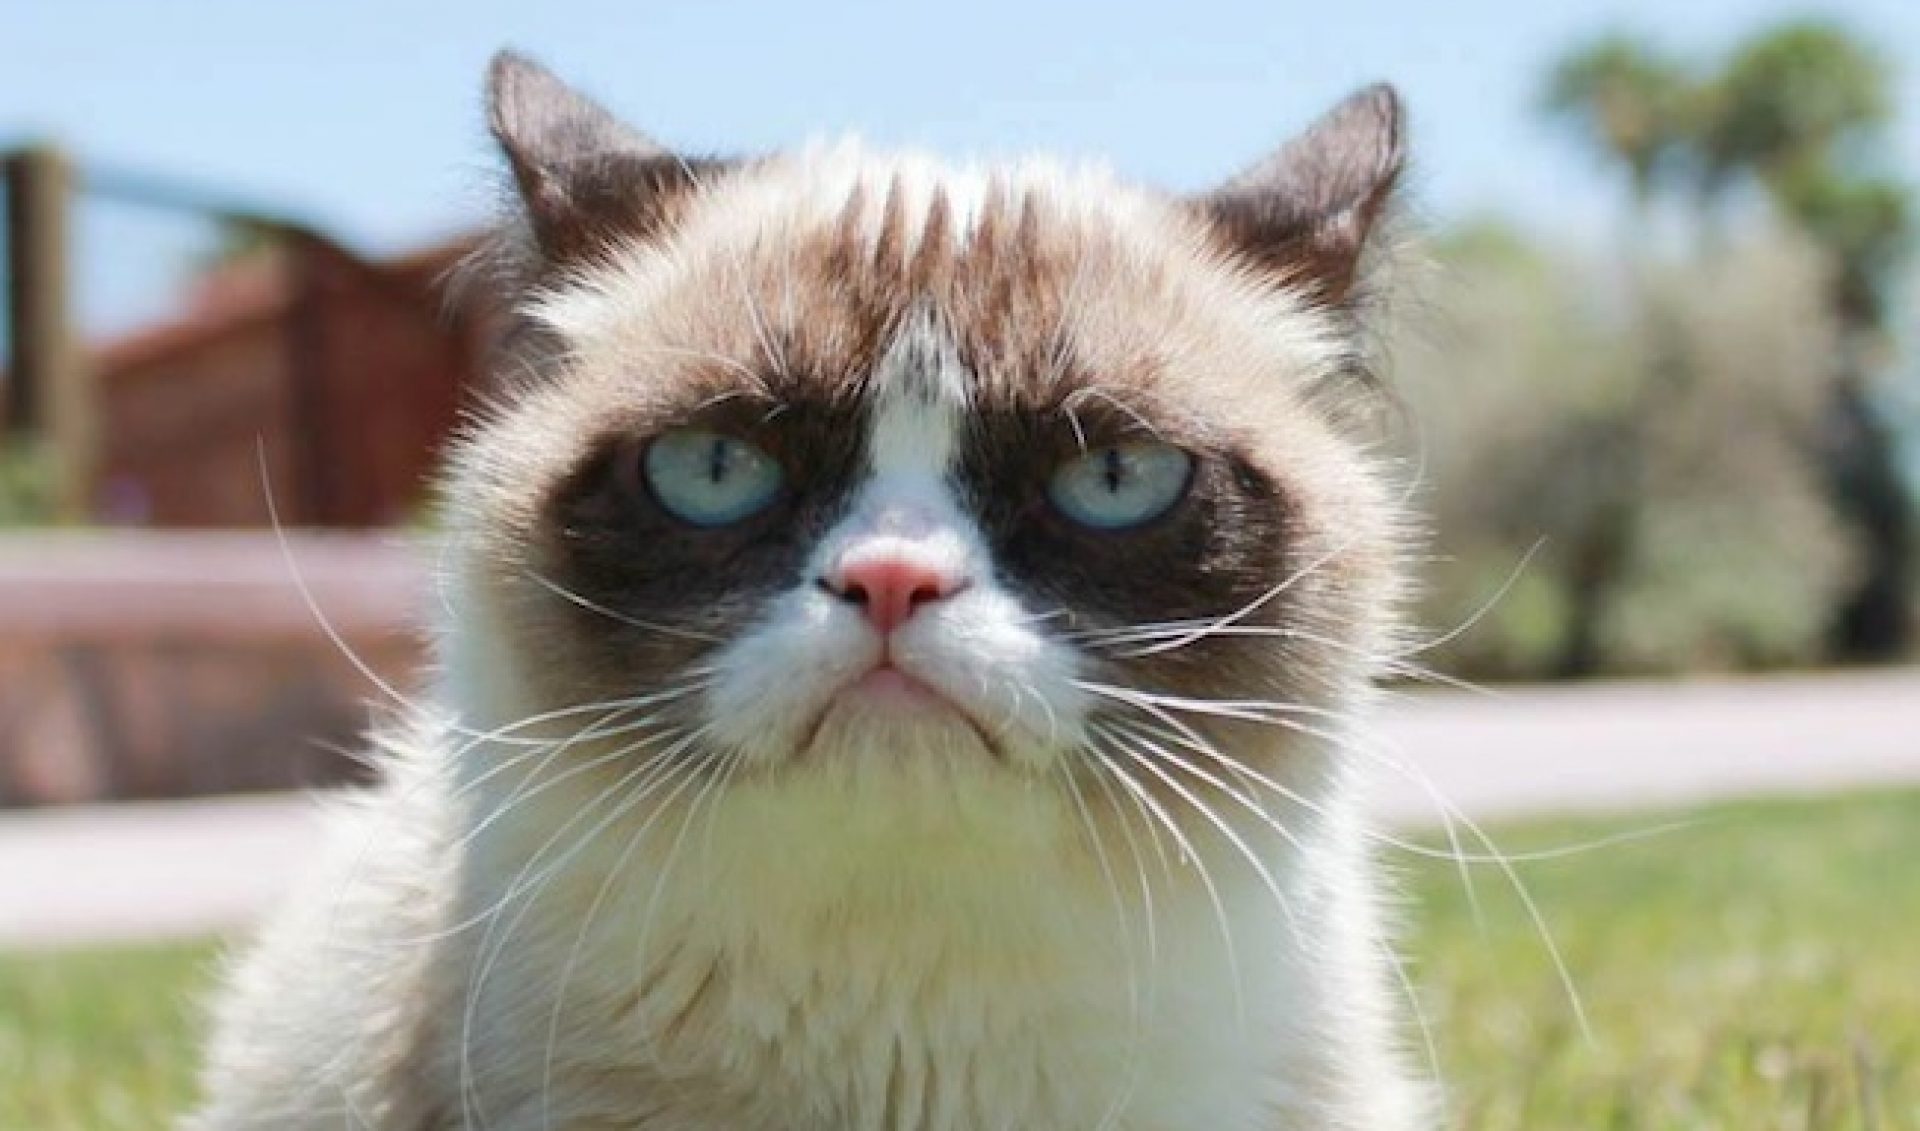 Did You Know Grumpy Cat Has A Movie Deal